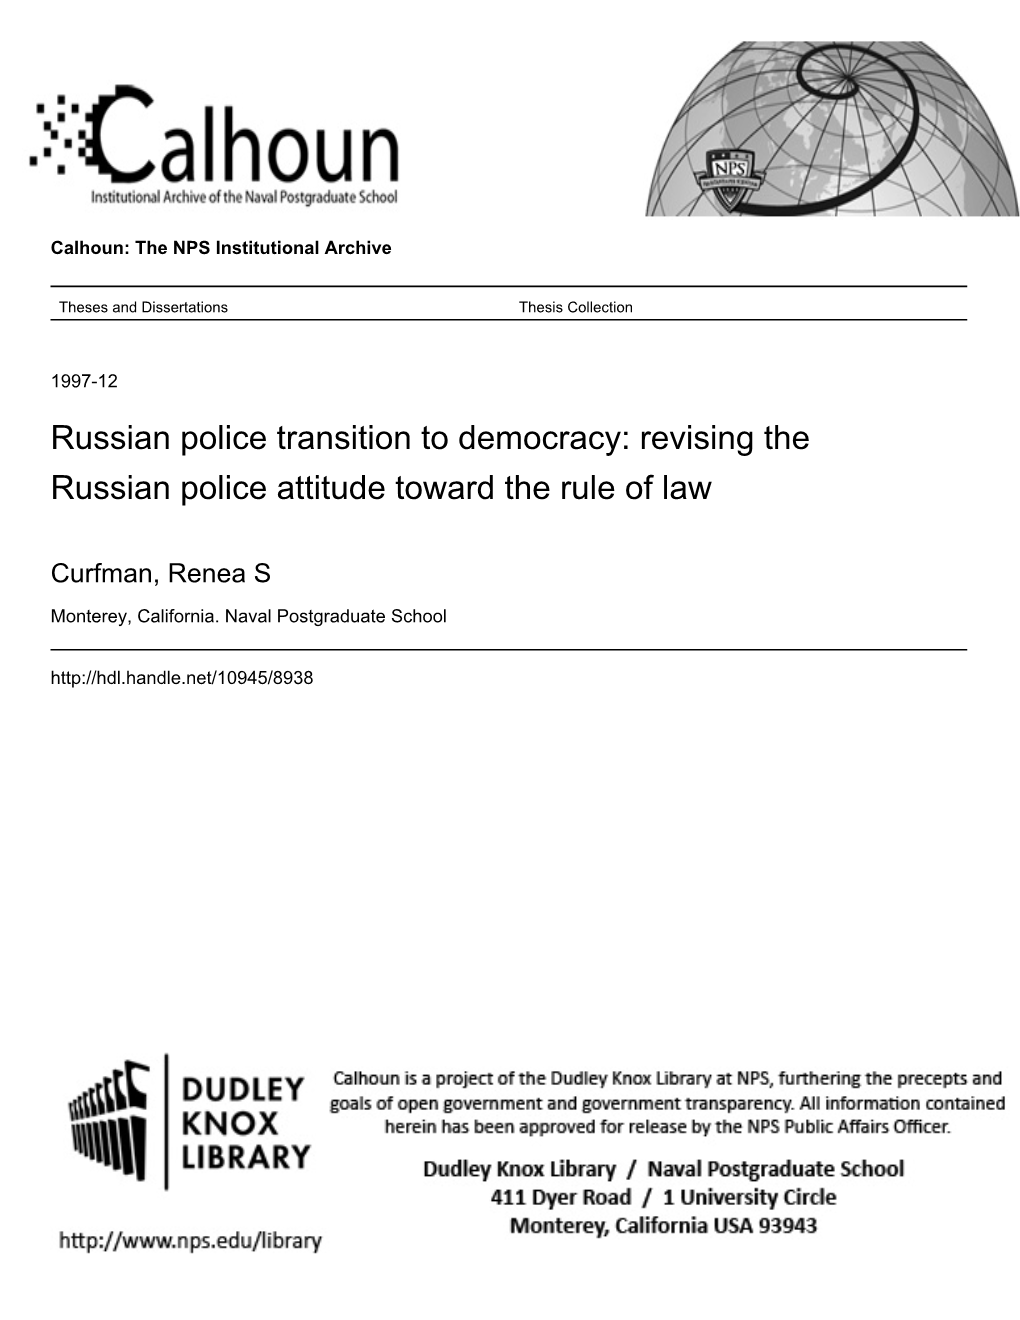 Russian Police Transition to Democracy: Revising the Russian Police Attitude Toward the Rule of Law